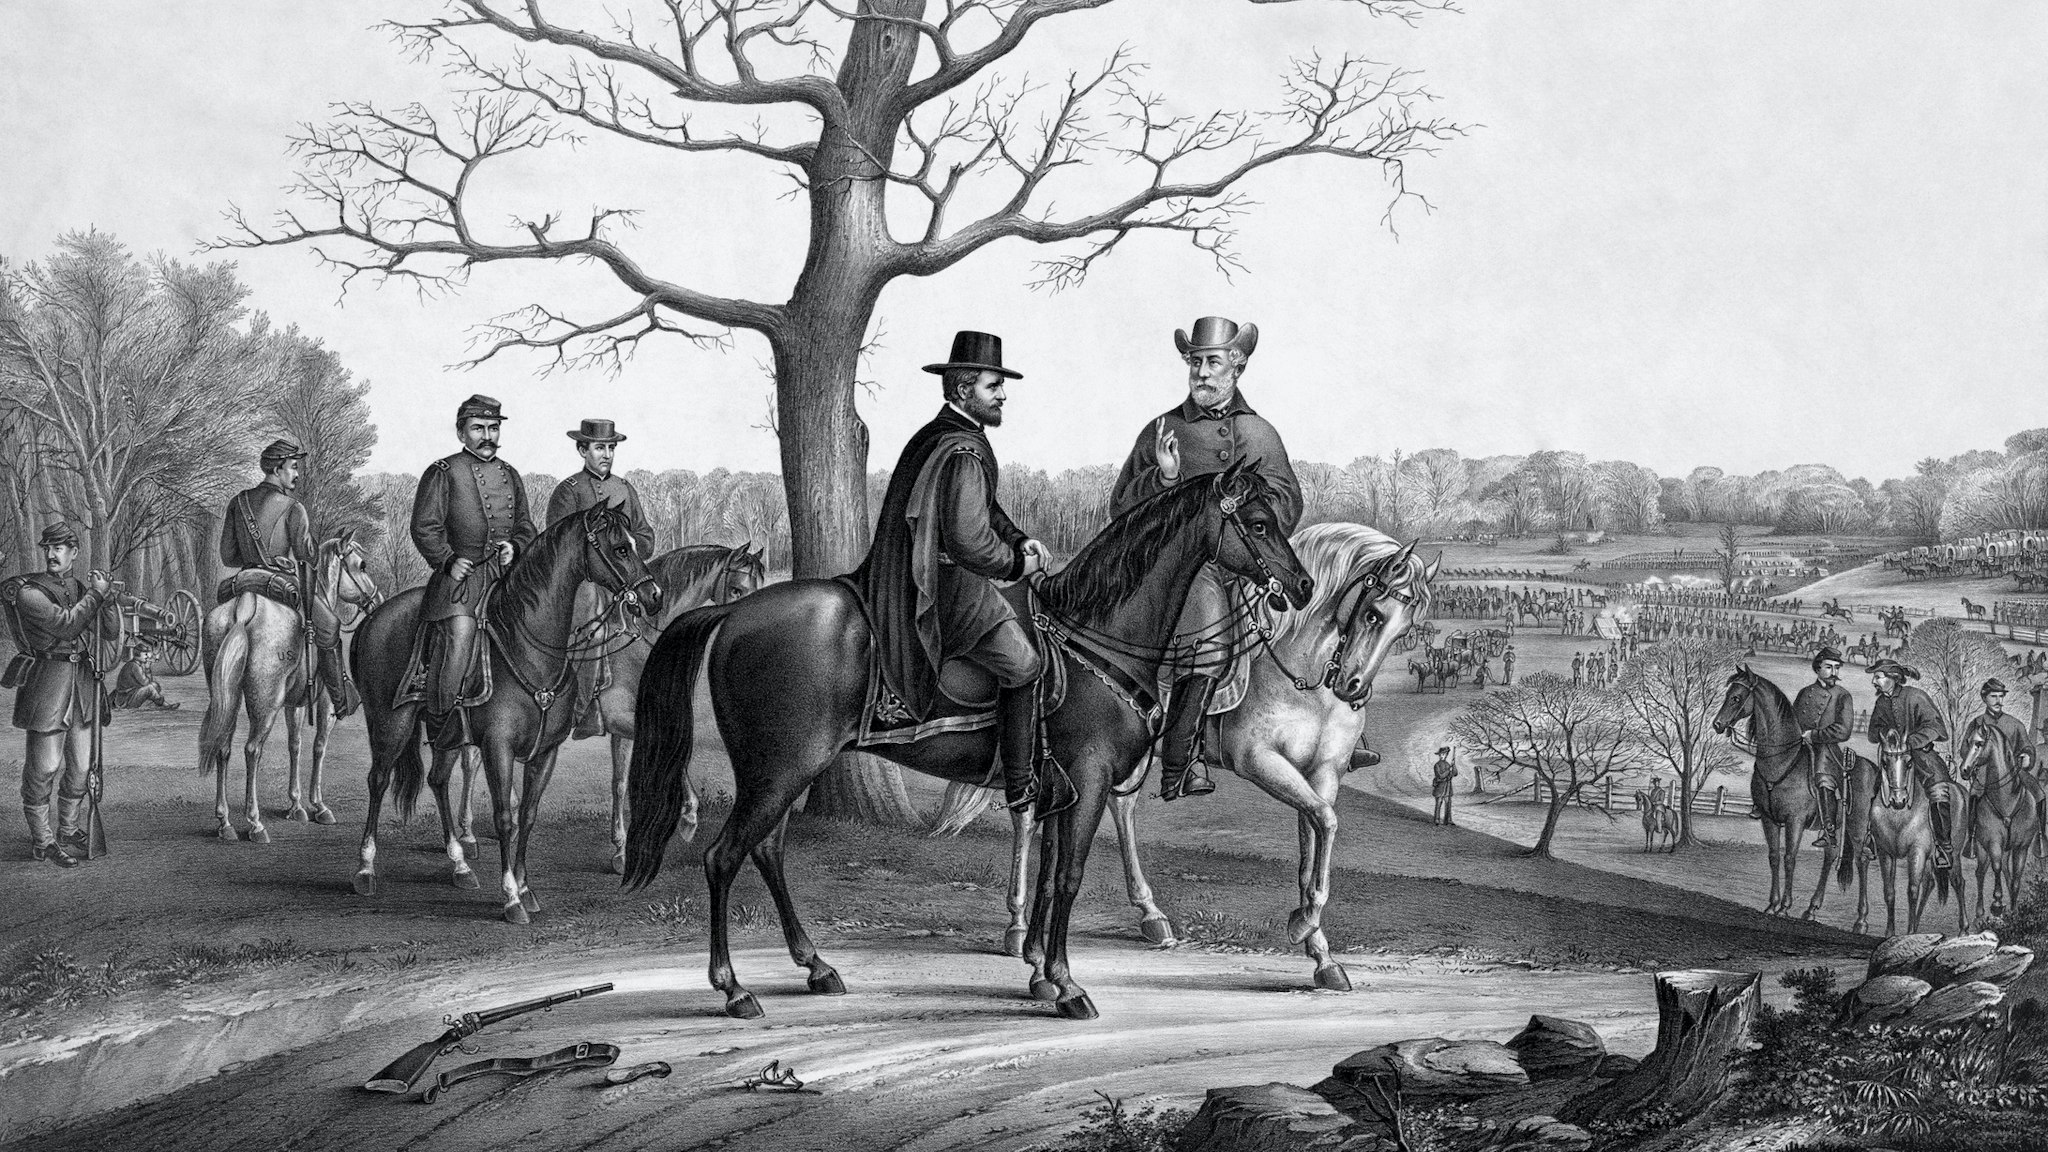 Vintage Civil War print of Generals Robert E. Lee and Ulysses S. Grant, planning the surrender of Lee's Confederate Army, surrounded by troops on horseback. It also includes a small image of The McLean House, where the official surrender was signed.